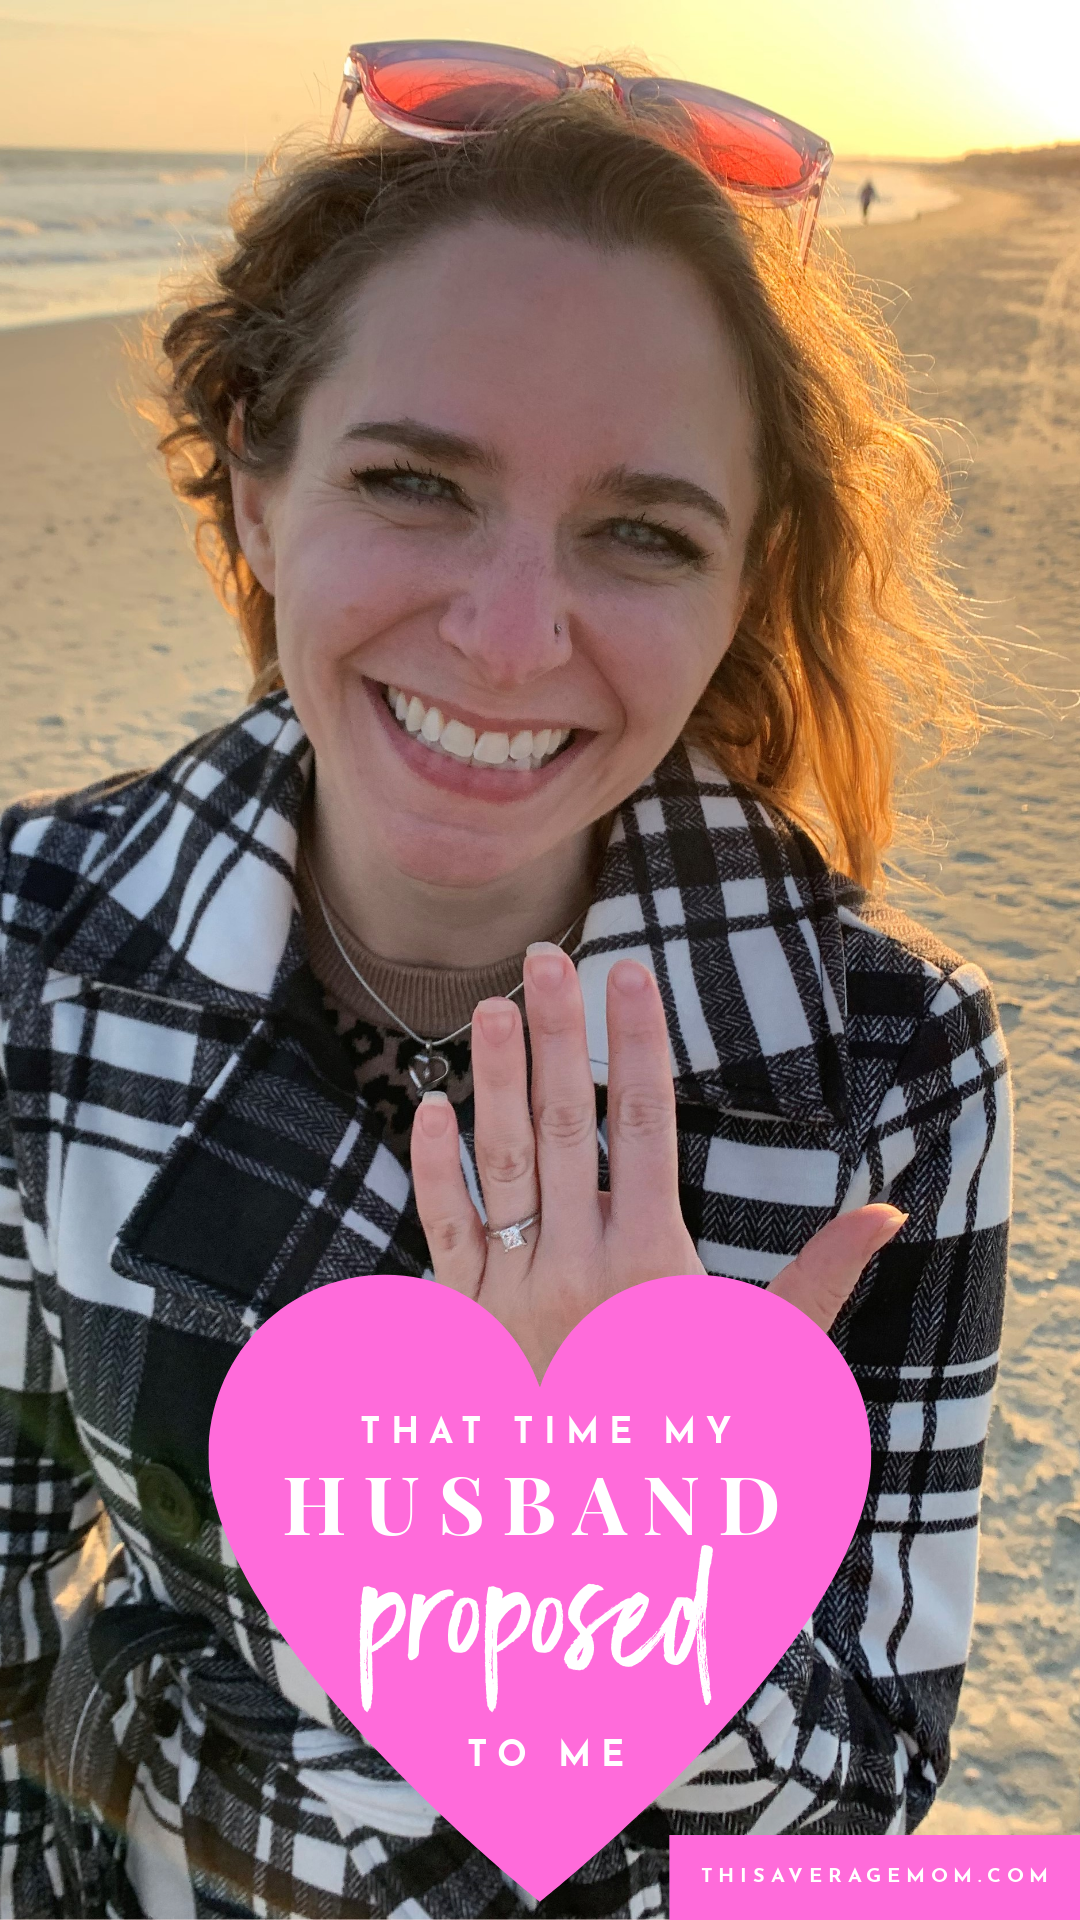 Ever had your HUSBAND propose to you? I have!! Sharing about the (re)proposal and upcoming vow renewal on the blog! #proposal #marriage #wedding